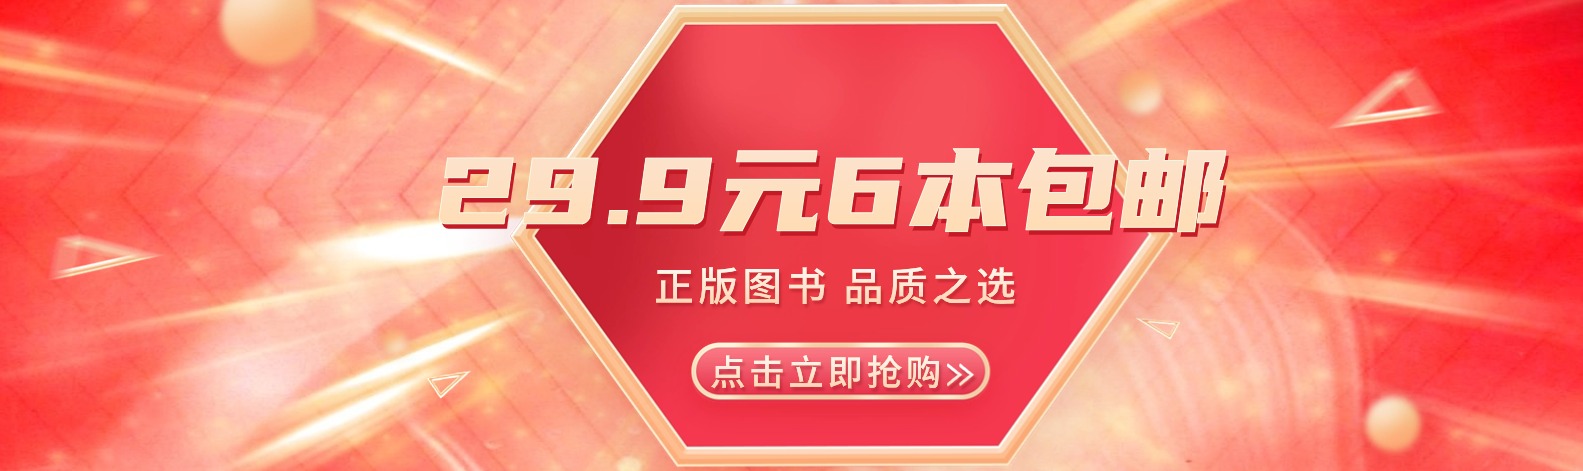 https://www.winxuan.com/front/promotion/activity/detail?id=1086